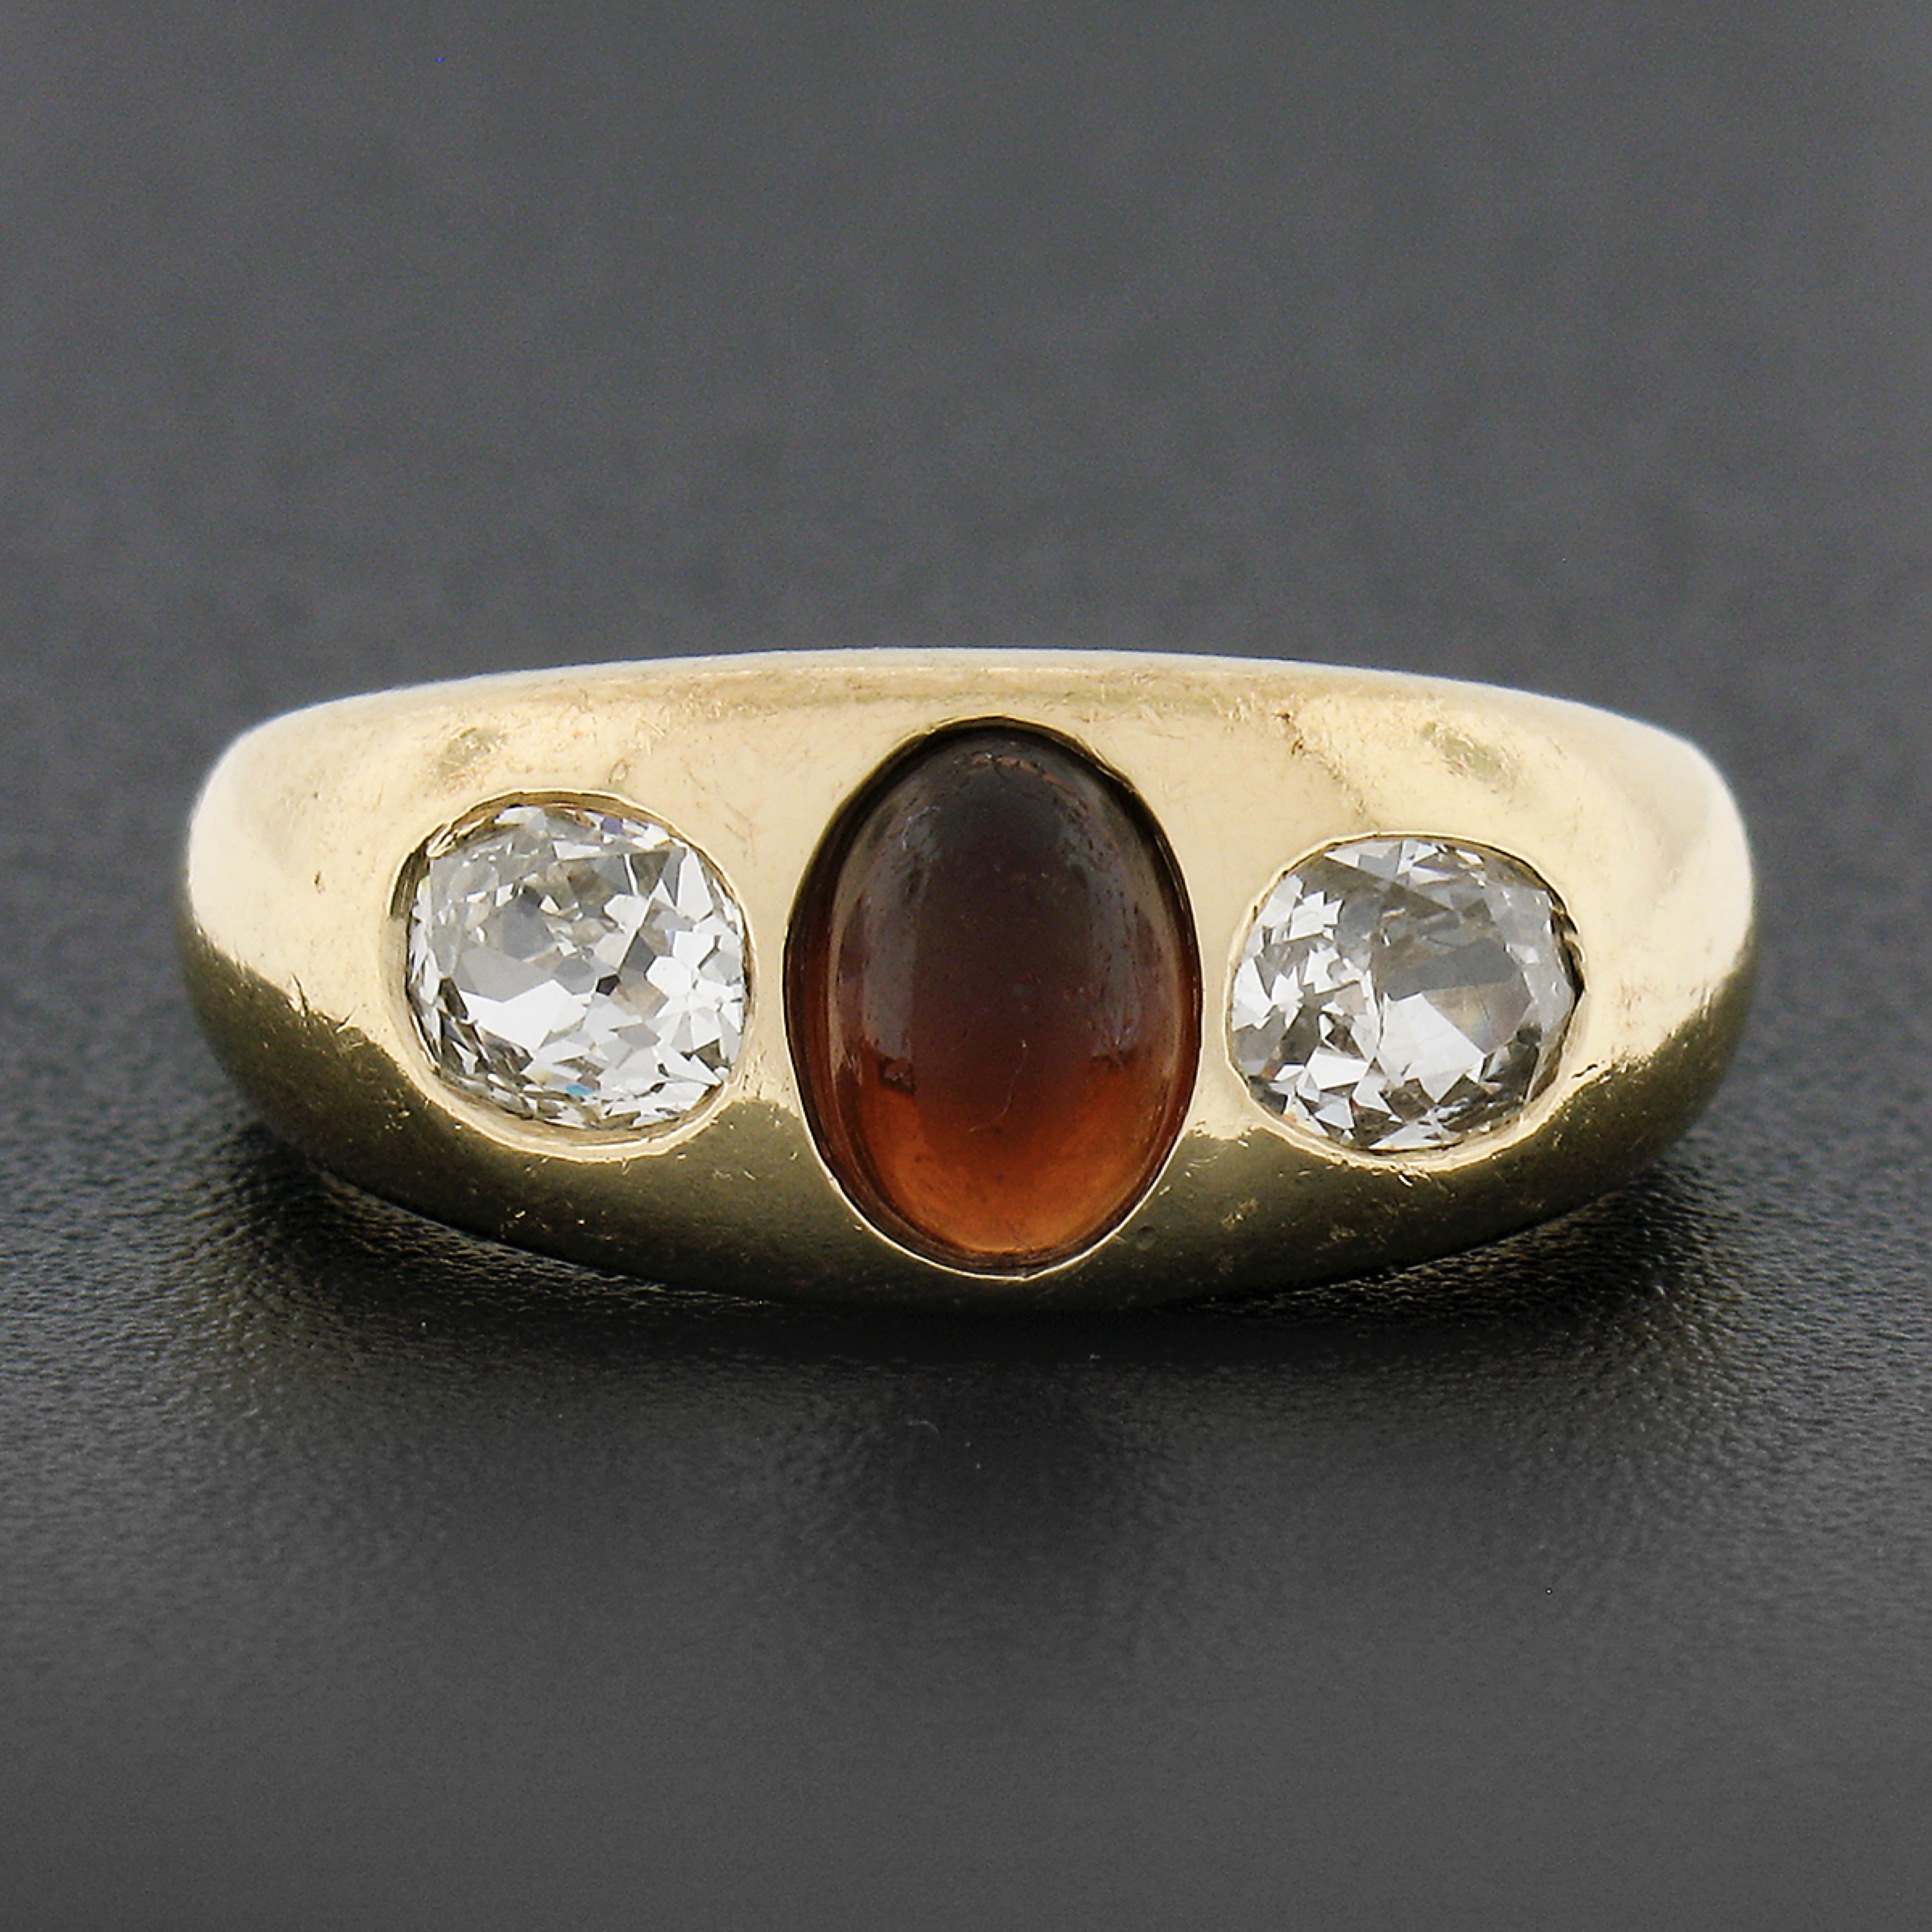 Here we have a beautiful antique ring that was crafted in solid 14k yellow gold during the late Victorian period, and features a classic three stone style with an oval cabochon garnet neatly set at the center. The natural garnet has a rich red color